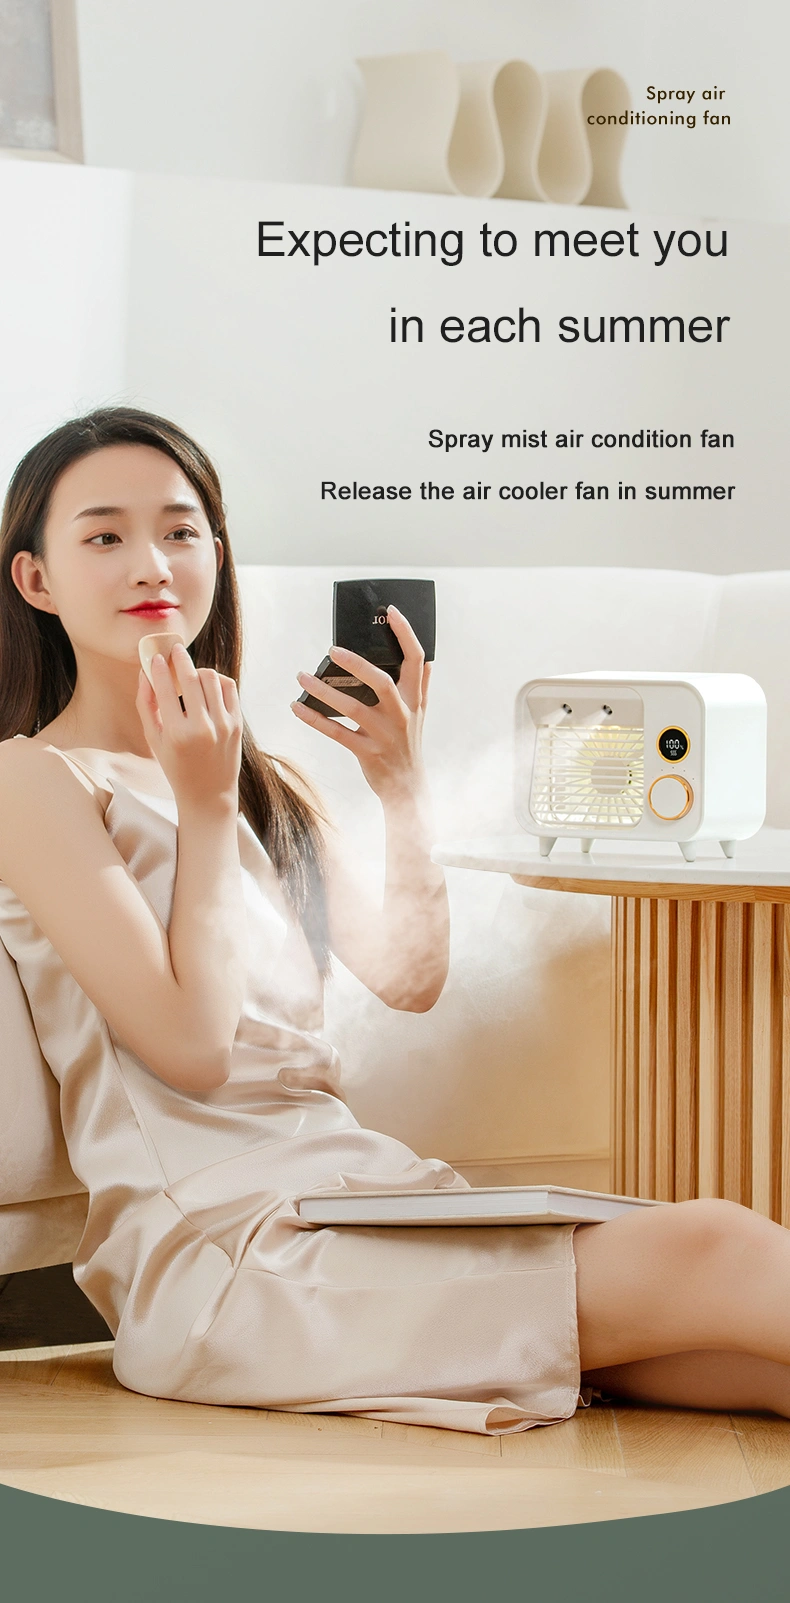 New LED Digital Display Home Appliance Portable Rechargeable Table Spray Mist Water Mini Electric USB Air Cooler Conditioner Desk Cool Fan